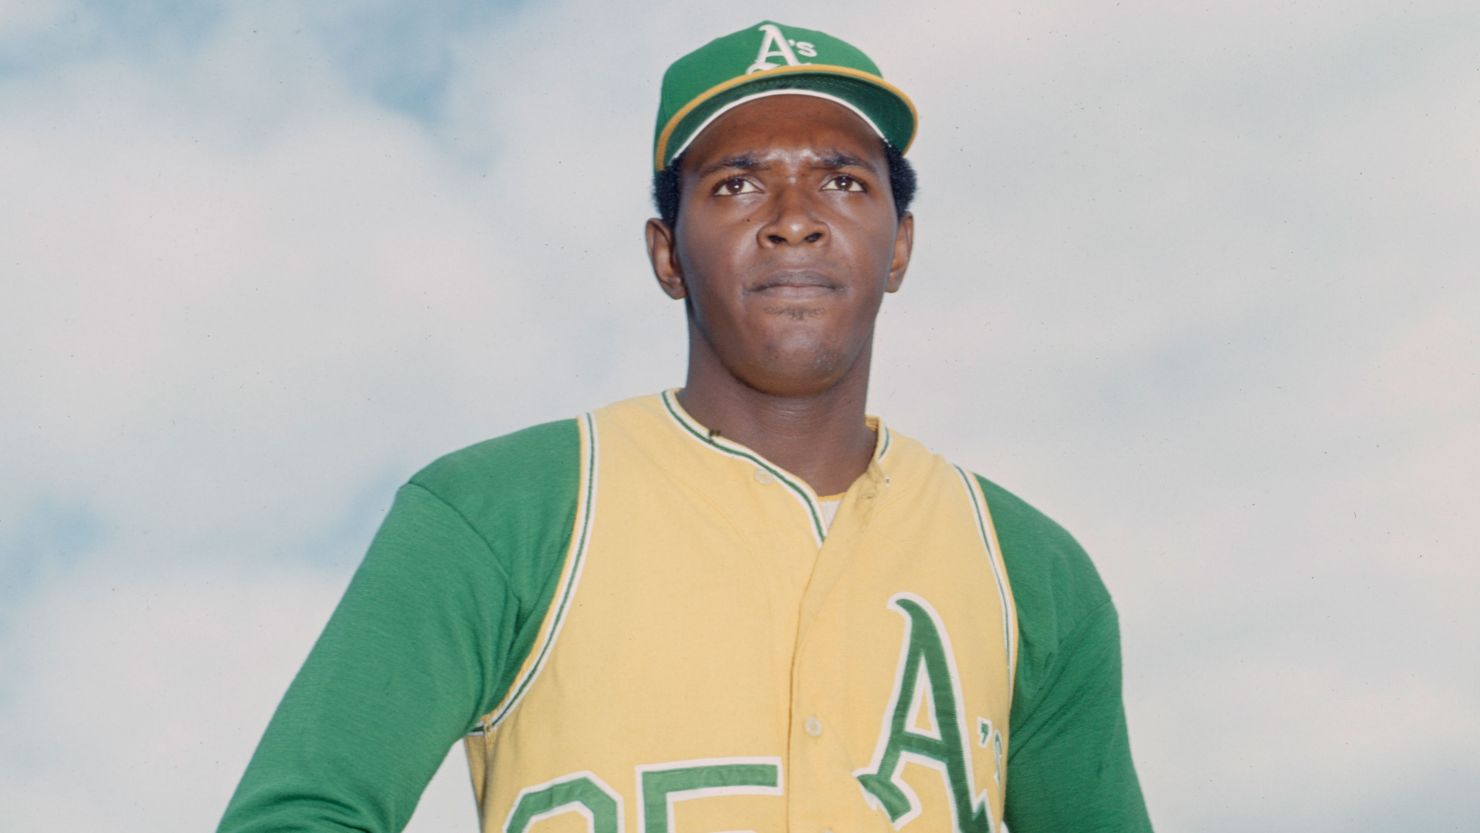 Oakland Athletics pitcher Vida Blue (35) poses for a portrait on the field.